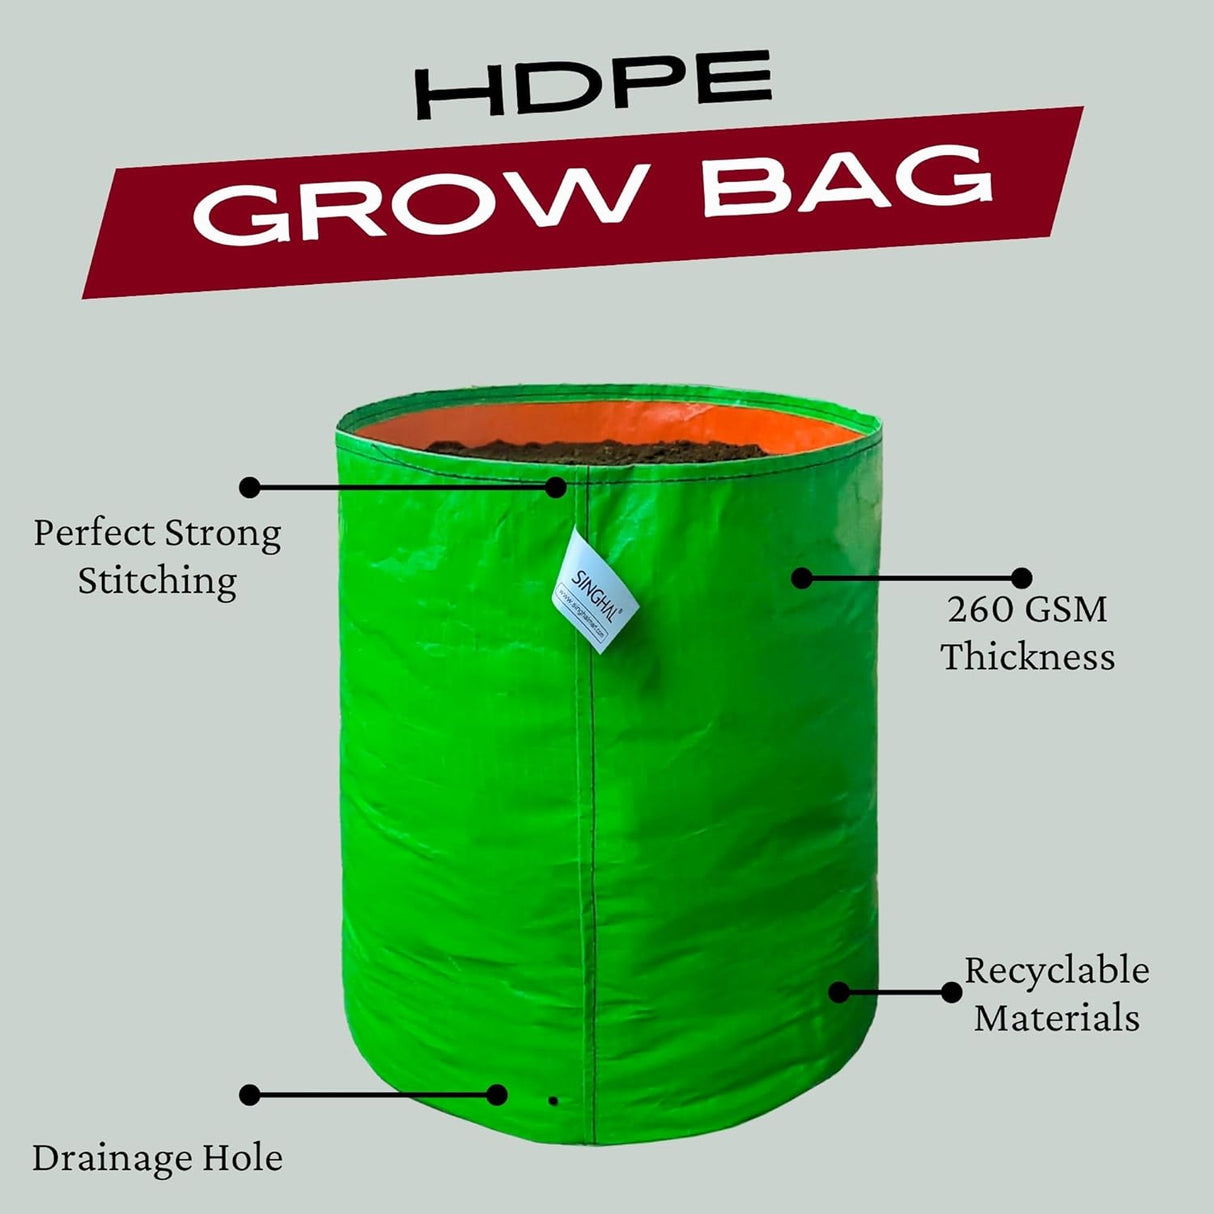 SINGHAL 24x24 inch Grow Bags Pack of 2 for Home Gardening, HDPE Plants Bag for Fruits, Vegetables Flowers, 260 GSM Grow Bag, UV Protected